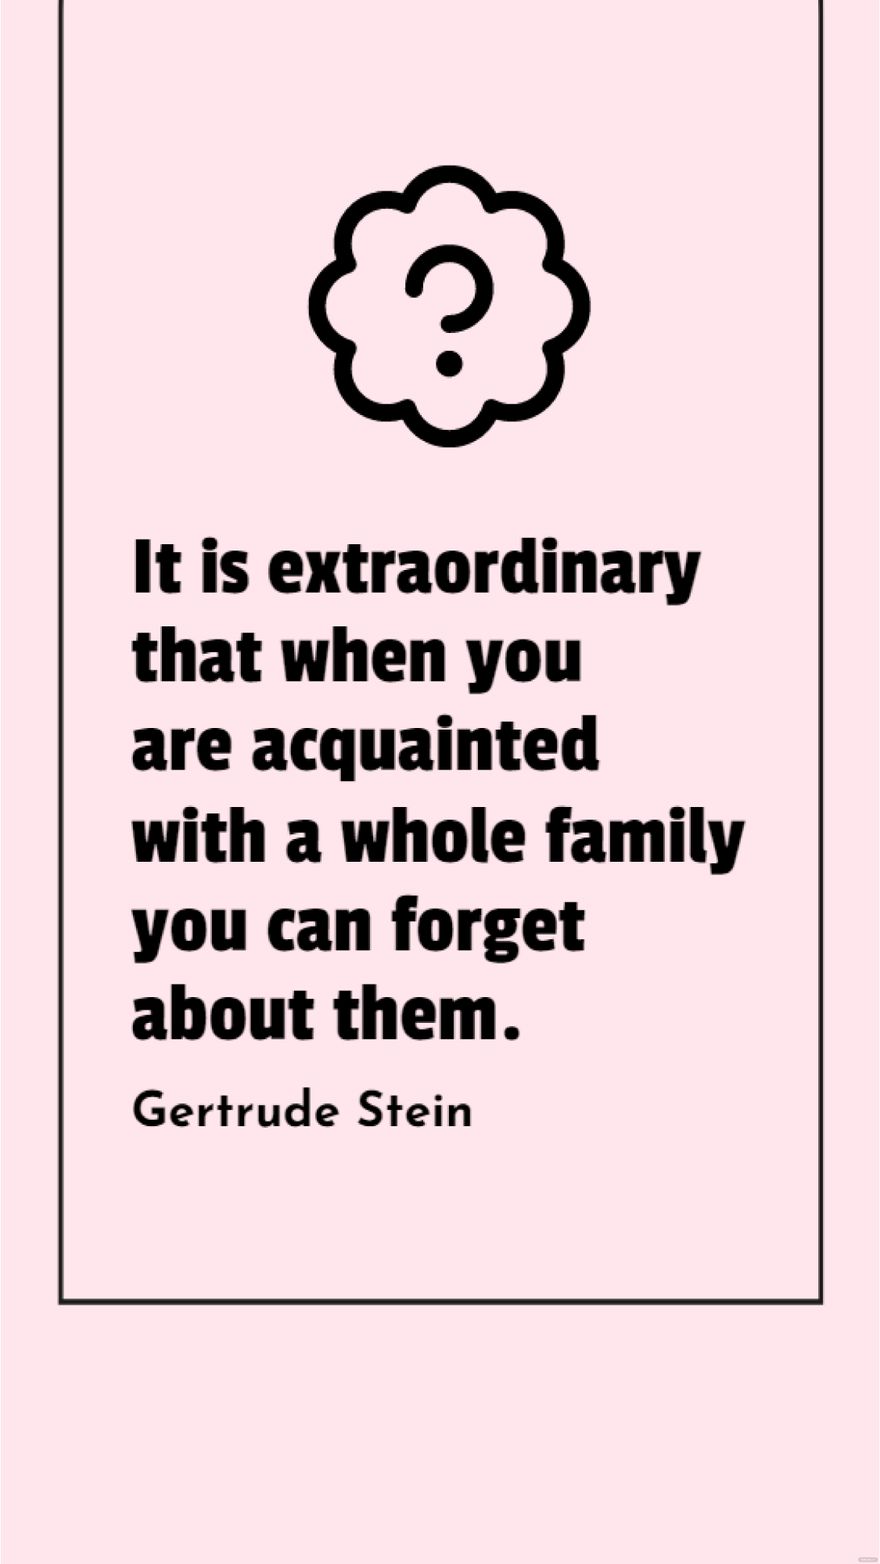 Free Gertrude Stein - It is extraordinary that when you are acquainted with a whole family you can forget about them. in JPG